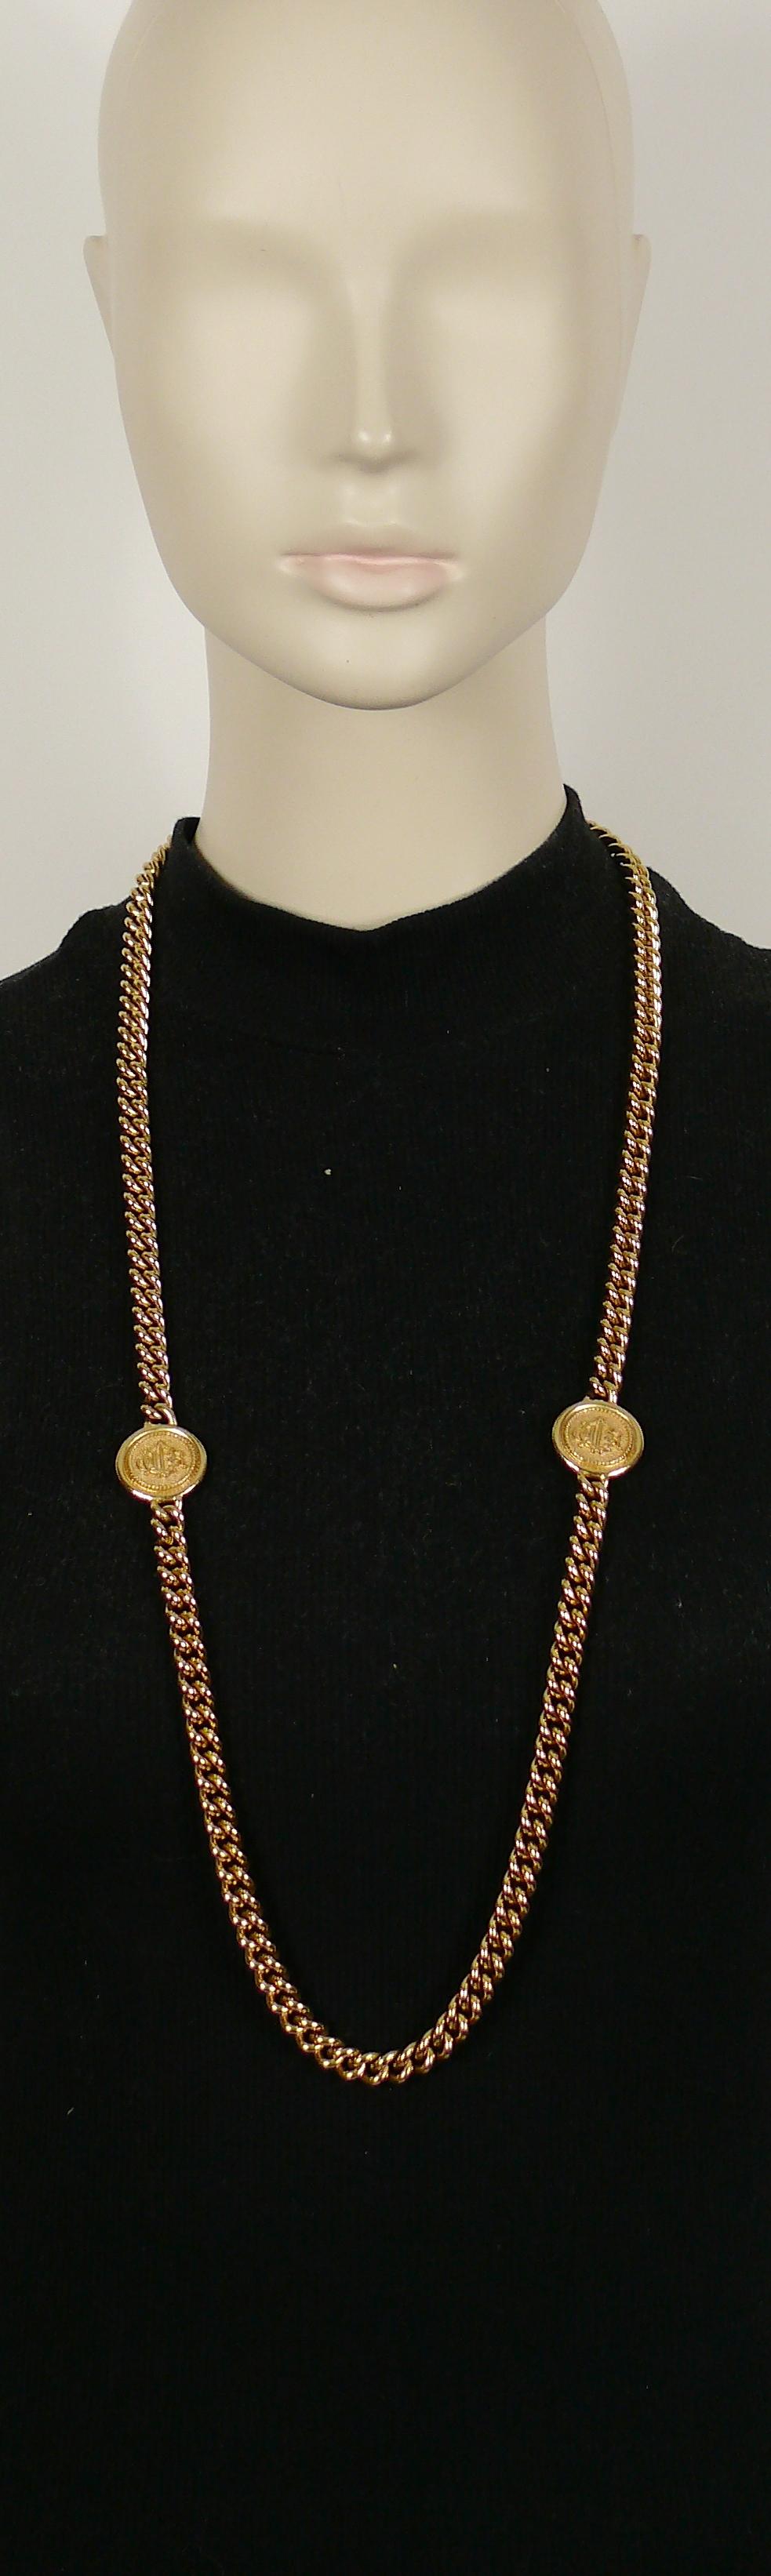 CHRISTIAN DIOR vintage gold toned chain sautoir necklace featuring two logo medallions.

Embossed CHR. DIOR.

Secure clasp closure.

Indicative measurements : total length approx. 90 cm (35.43 inches) / diameter of the medallions approx. 2.1 cm